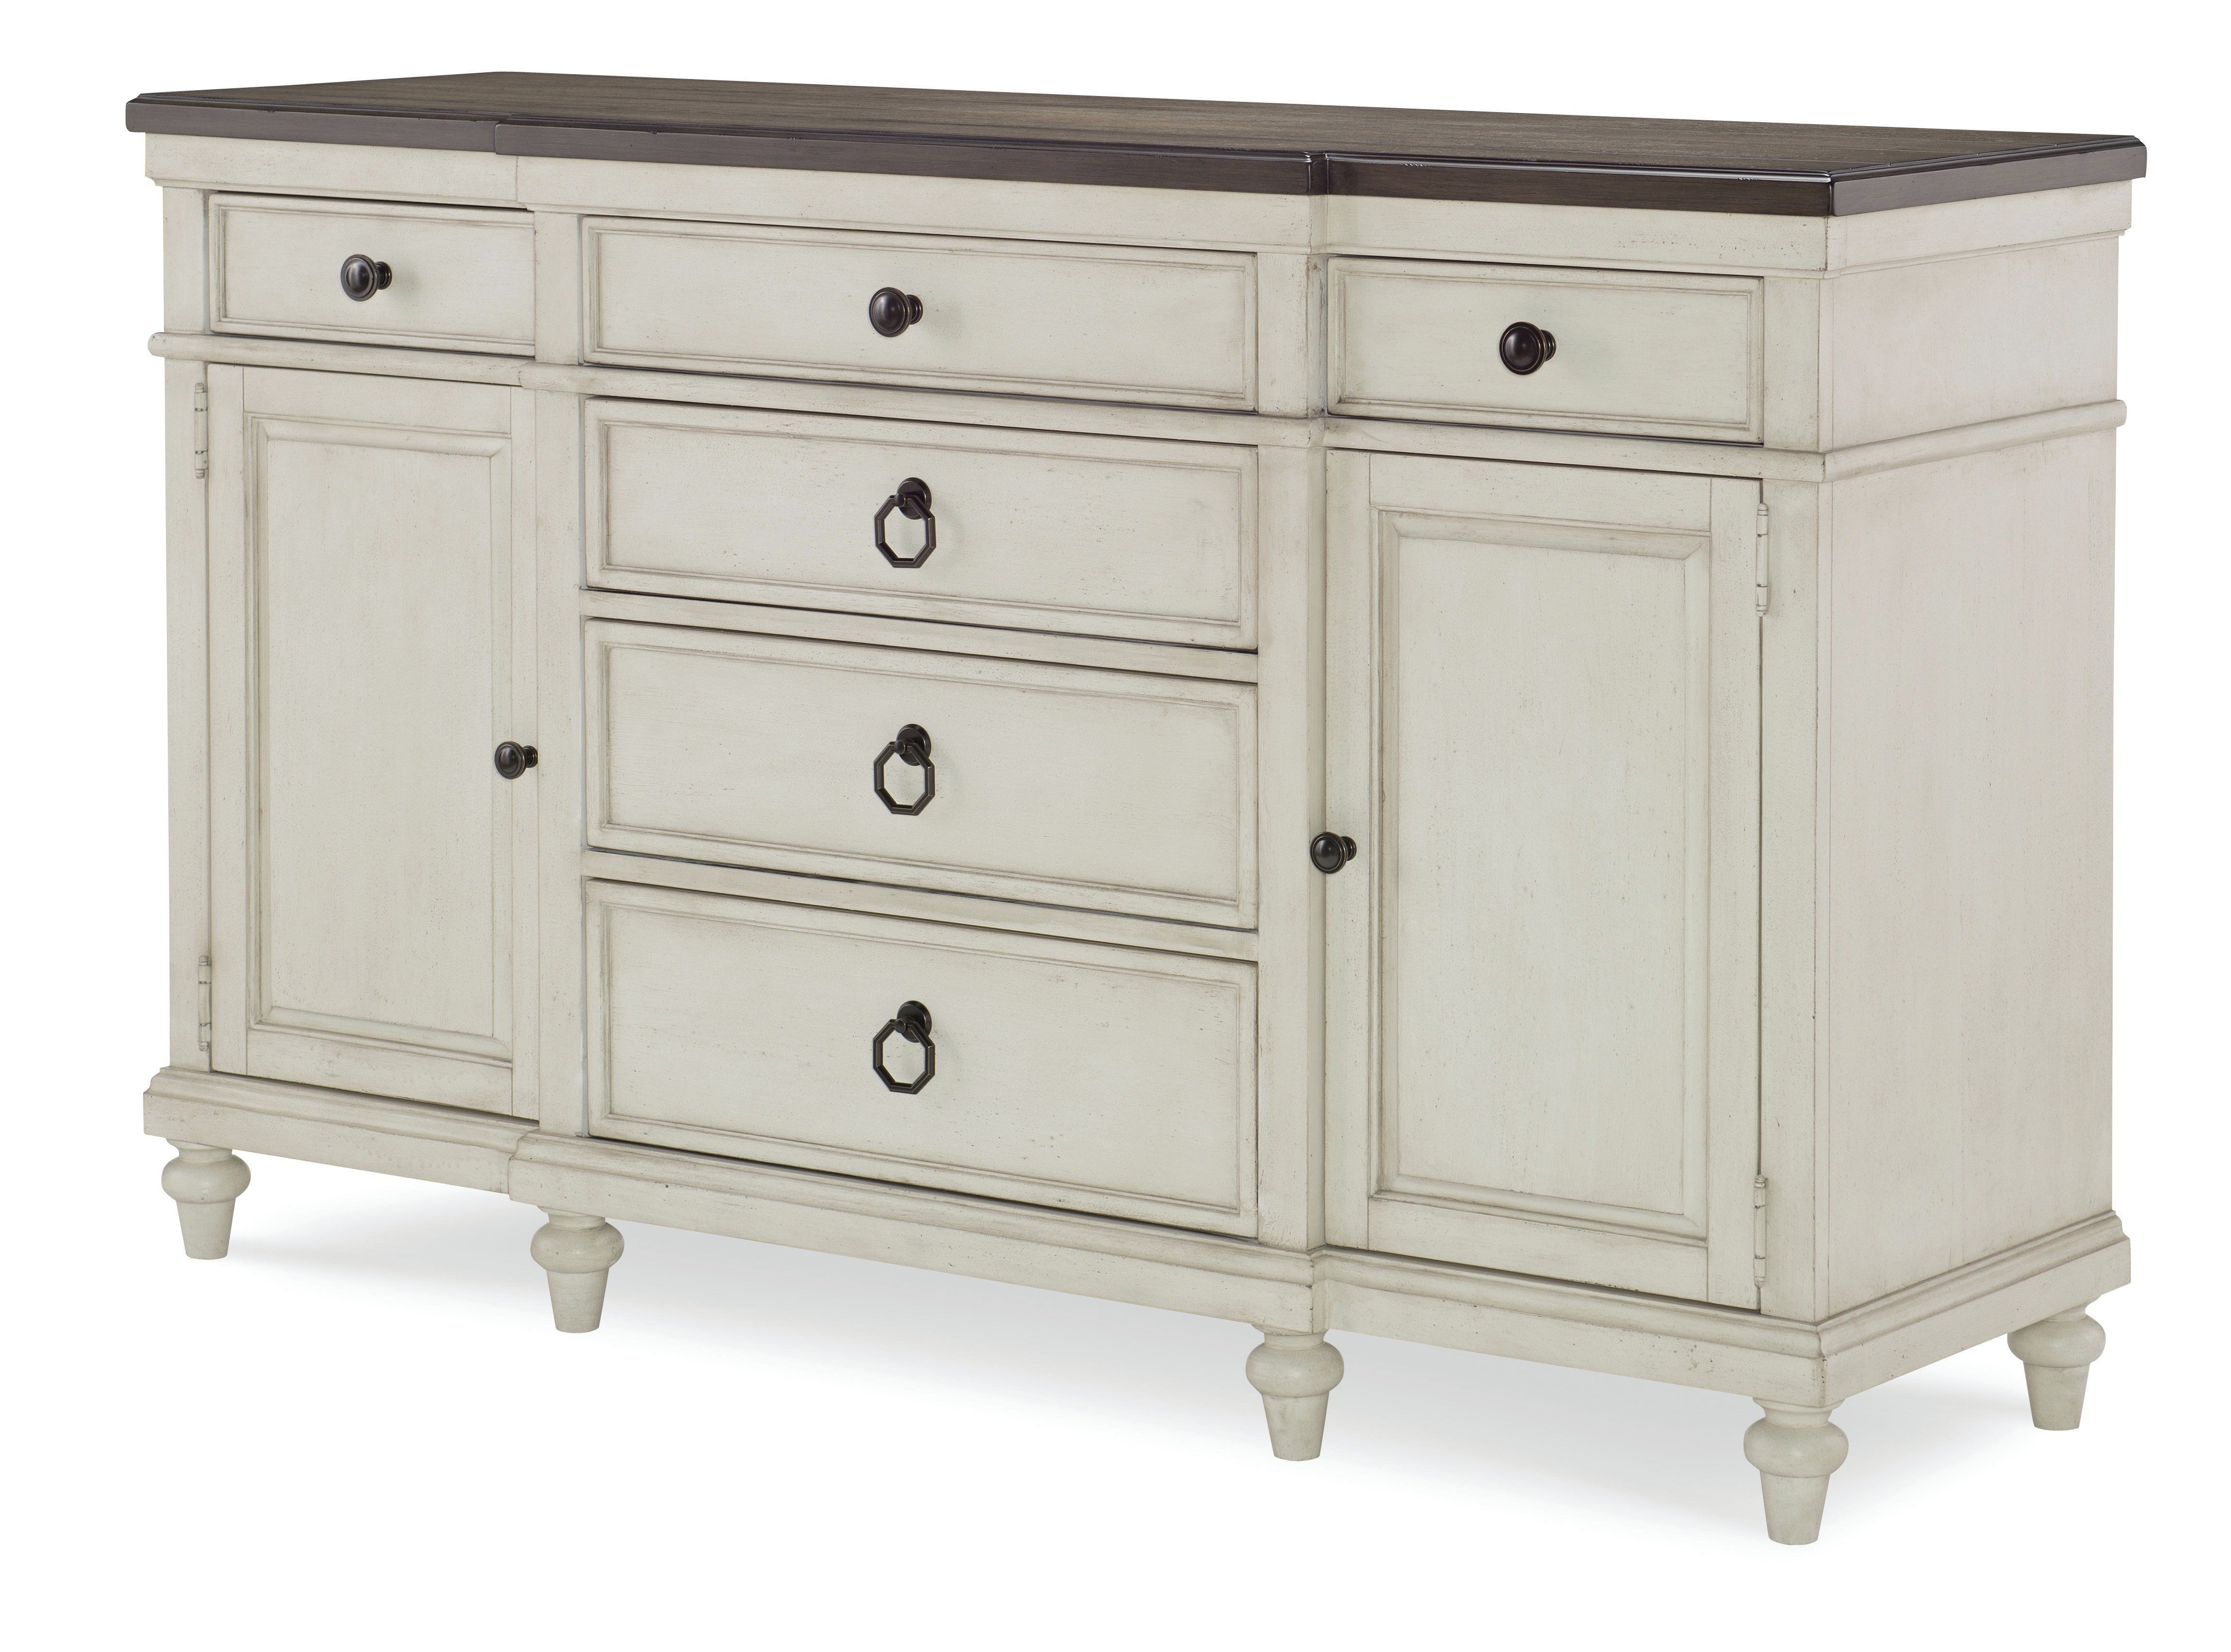 Assembled Sideboards & Buffets | Joss & Main Intended For Recent Chicoree Charlena Sideboards (View 7 of 20)